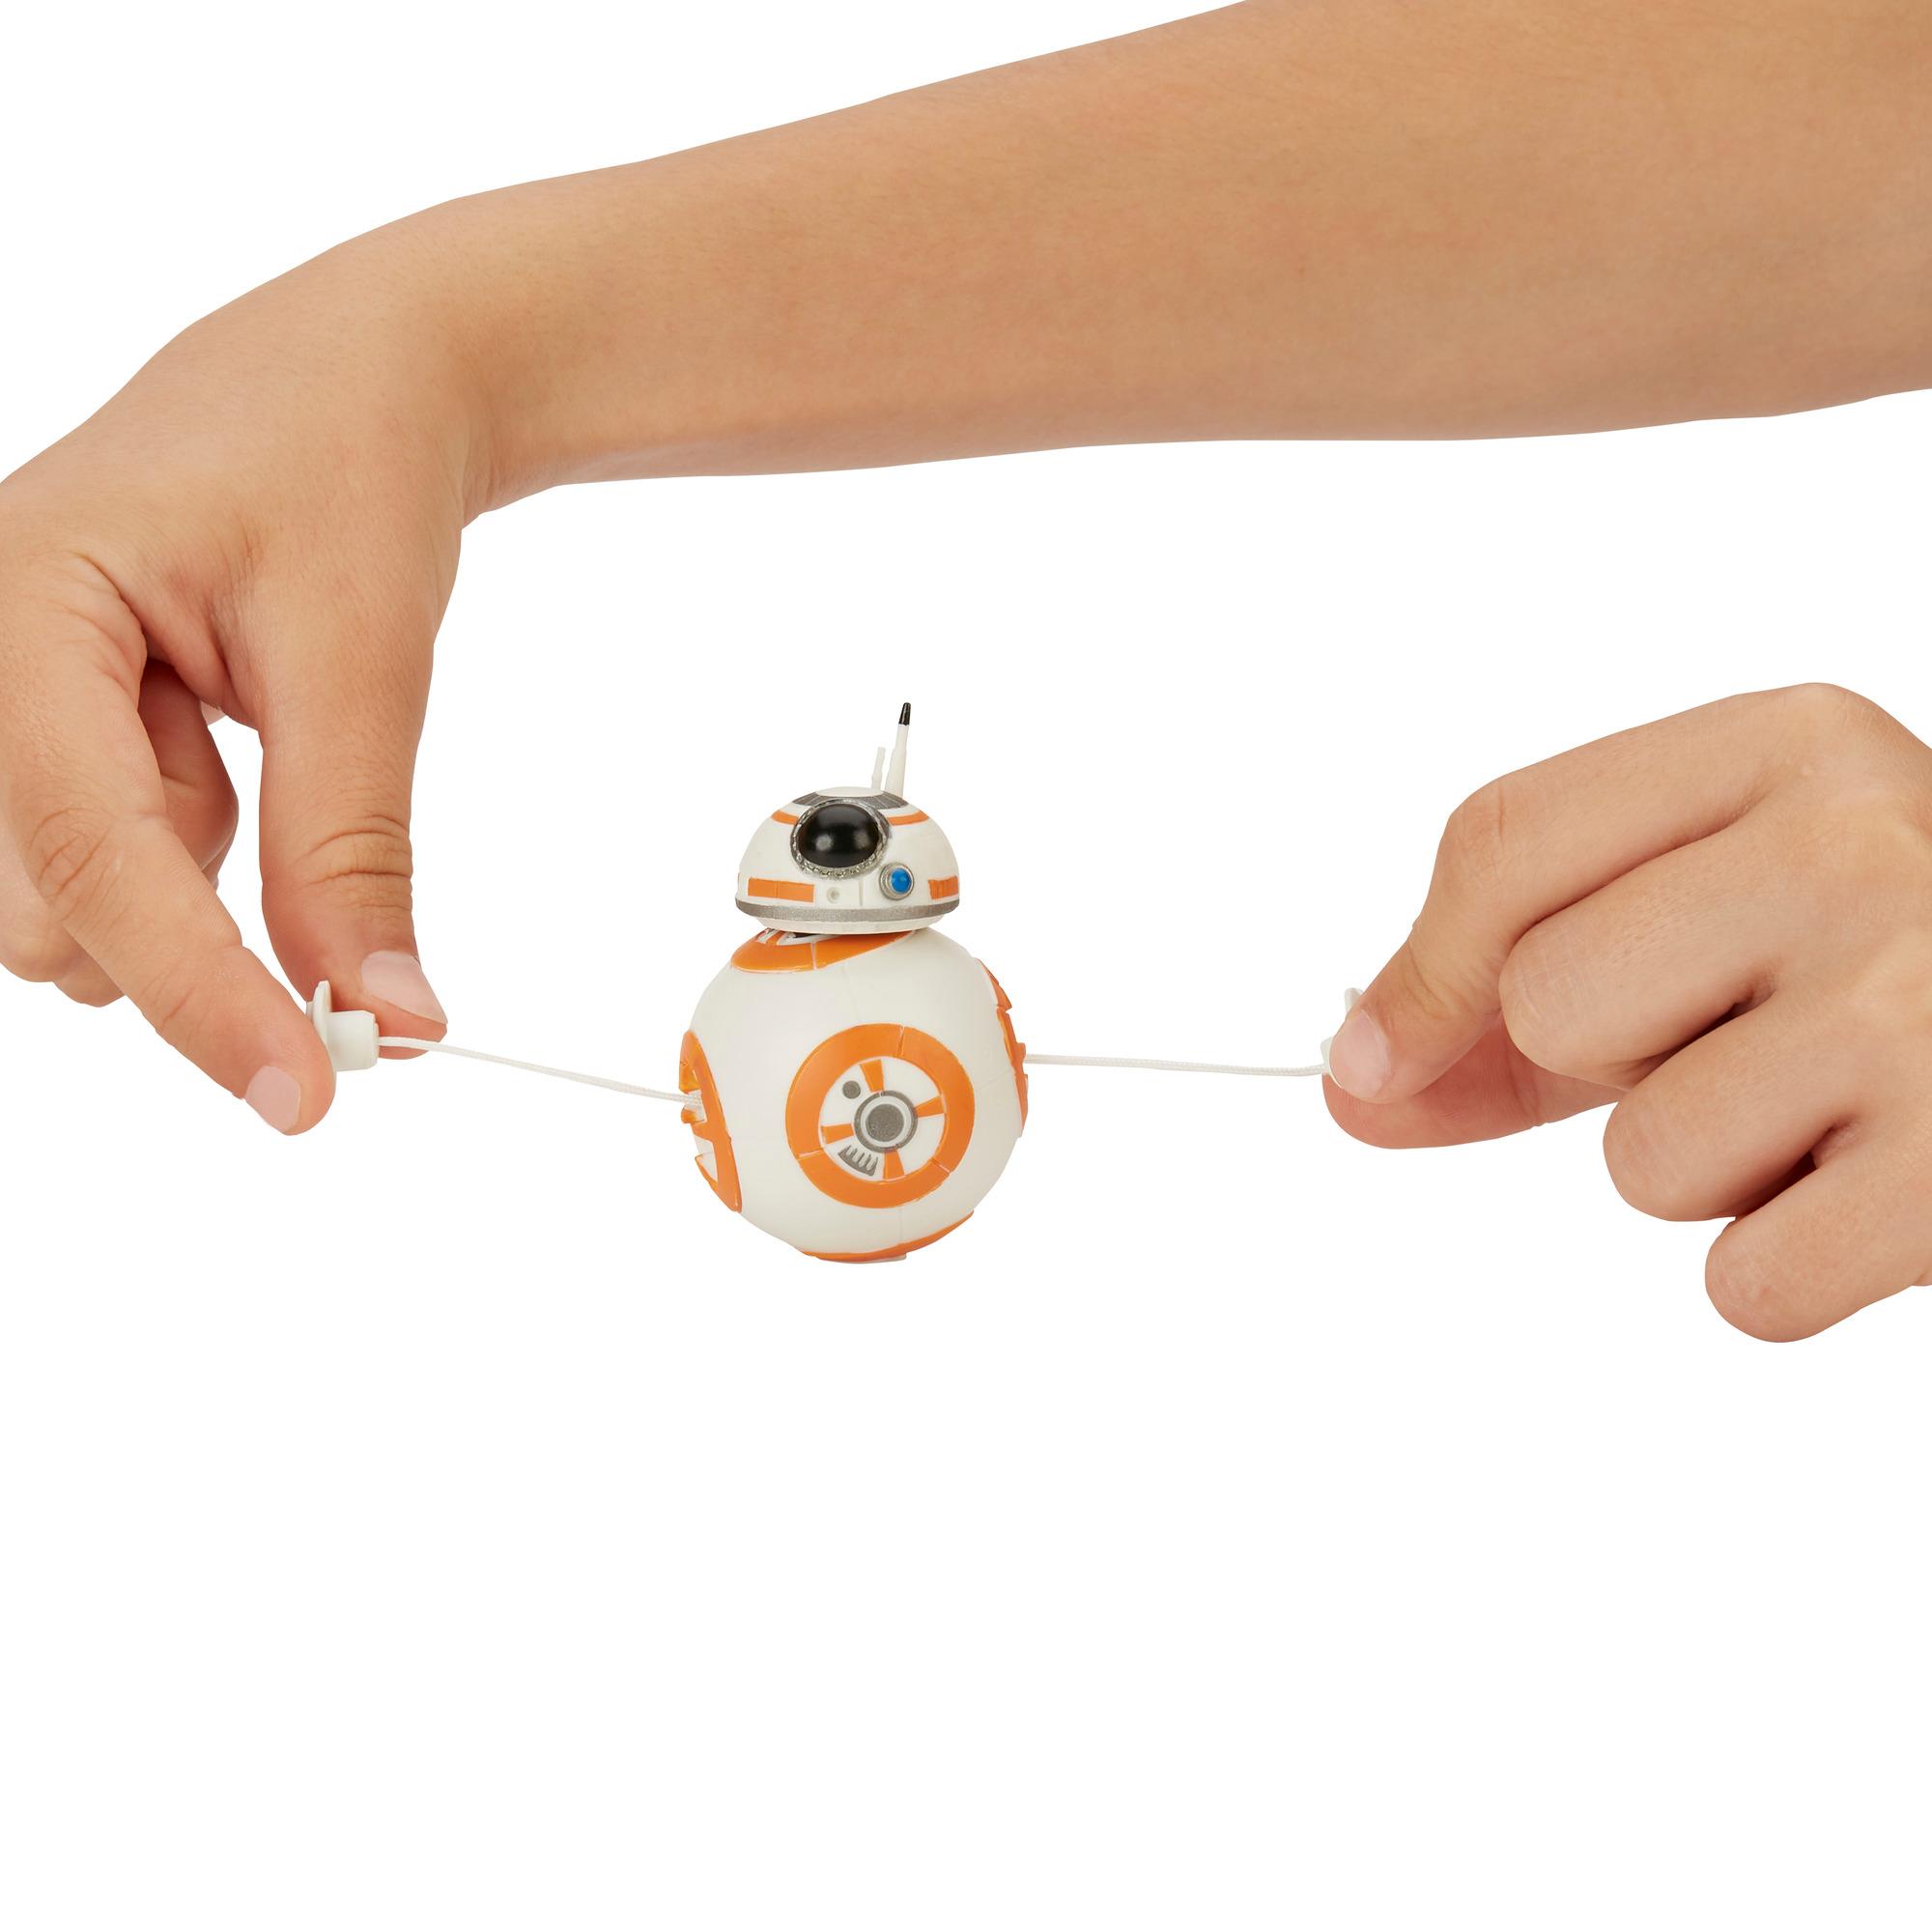 Hasbro Star Wars: Galaxy of Adventures BB-8 D-O 3-Pack Toy Droid Figures for sale online R2-D2